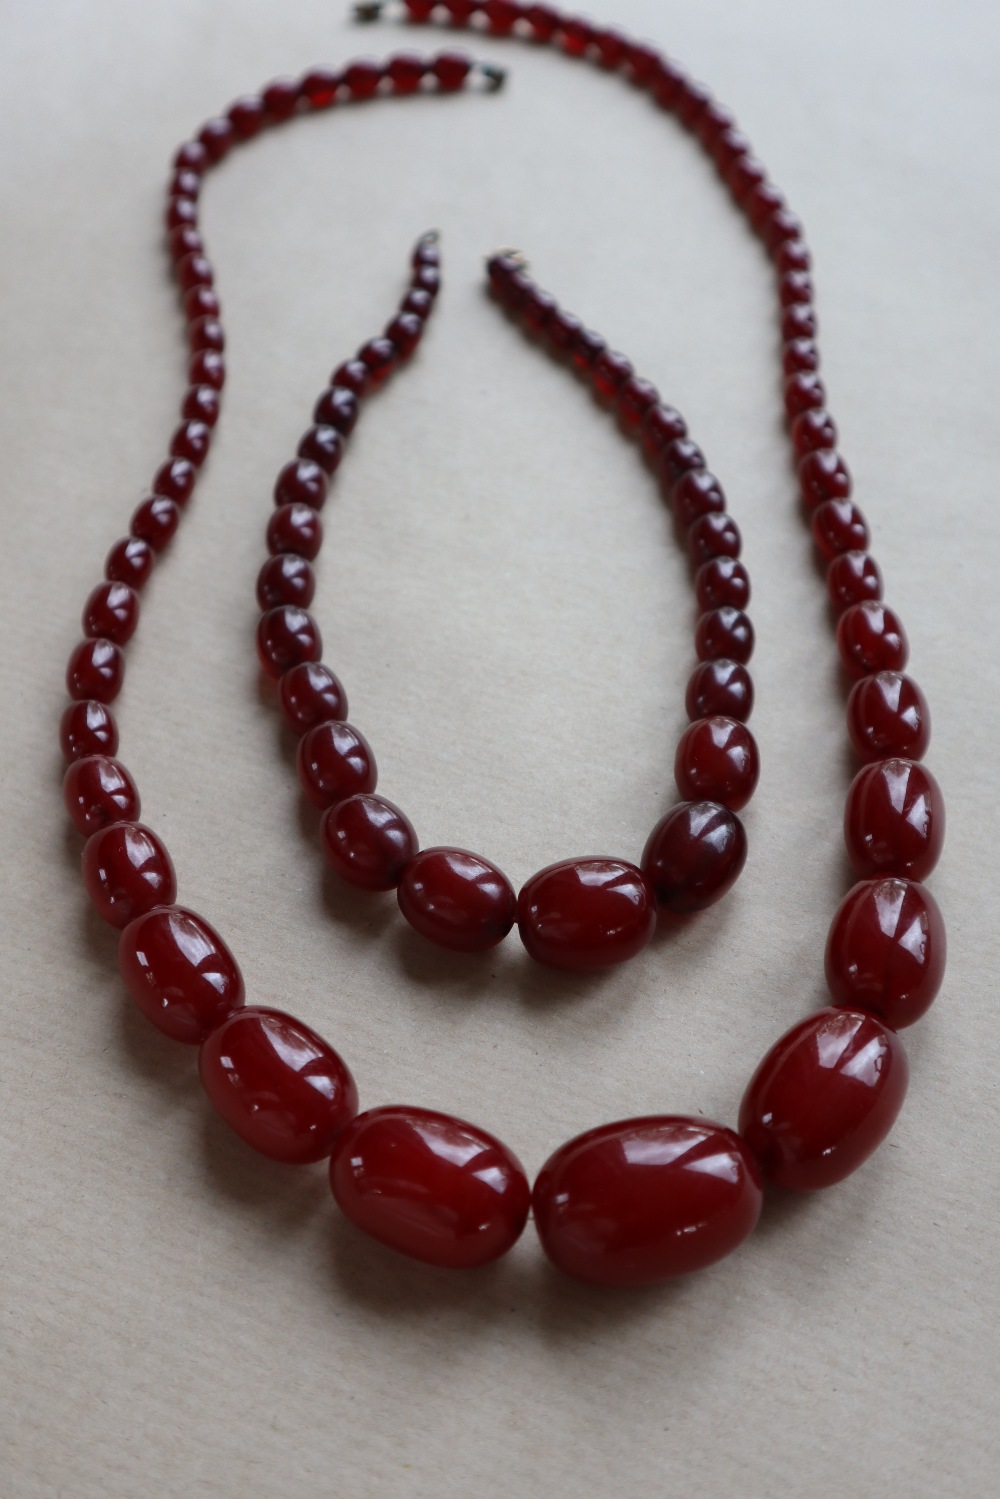 Two Cherry Amber / bakelite bead necklaces, ranging in size from 30mm to 10mm, 79cm long, - Image 2 of 12